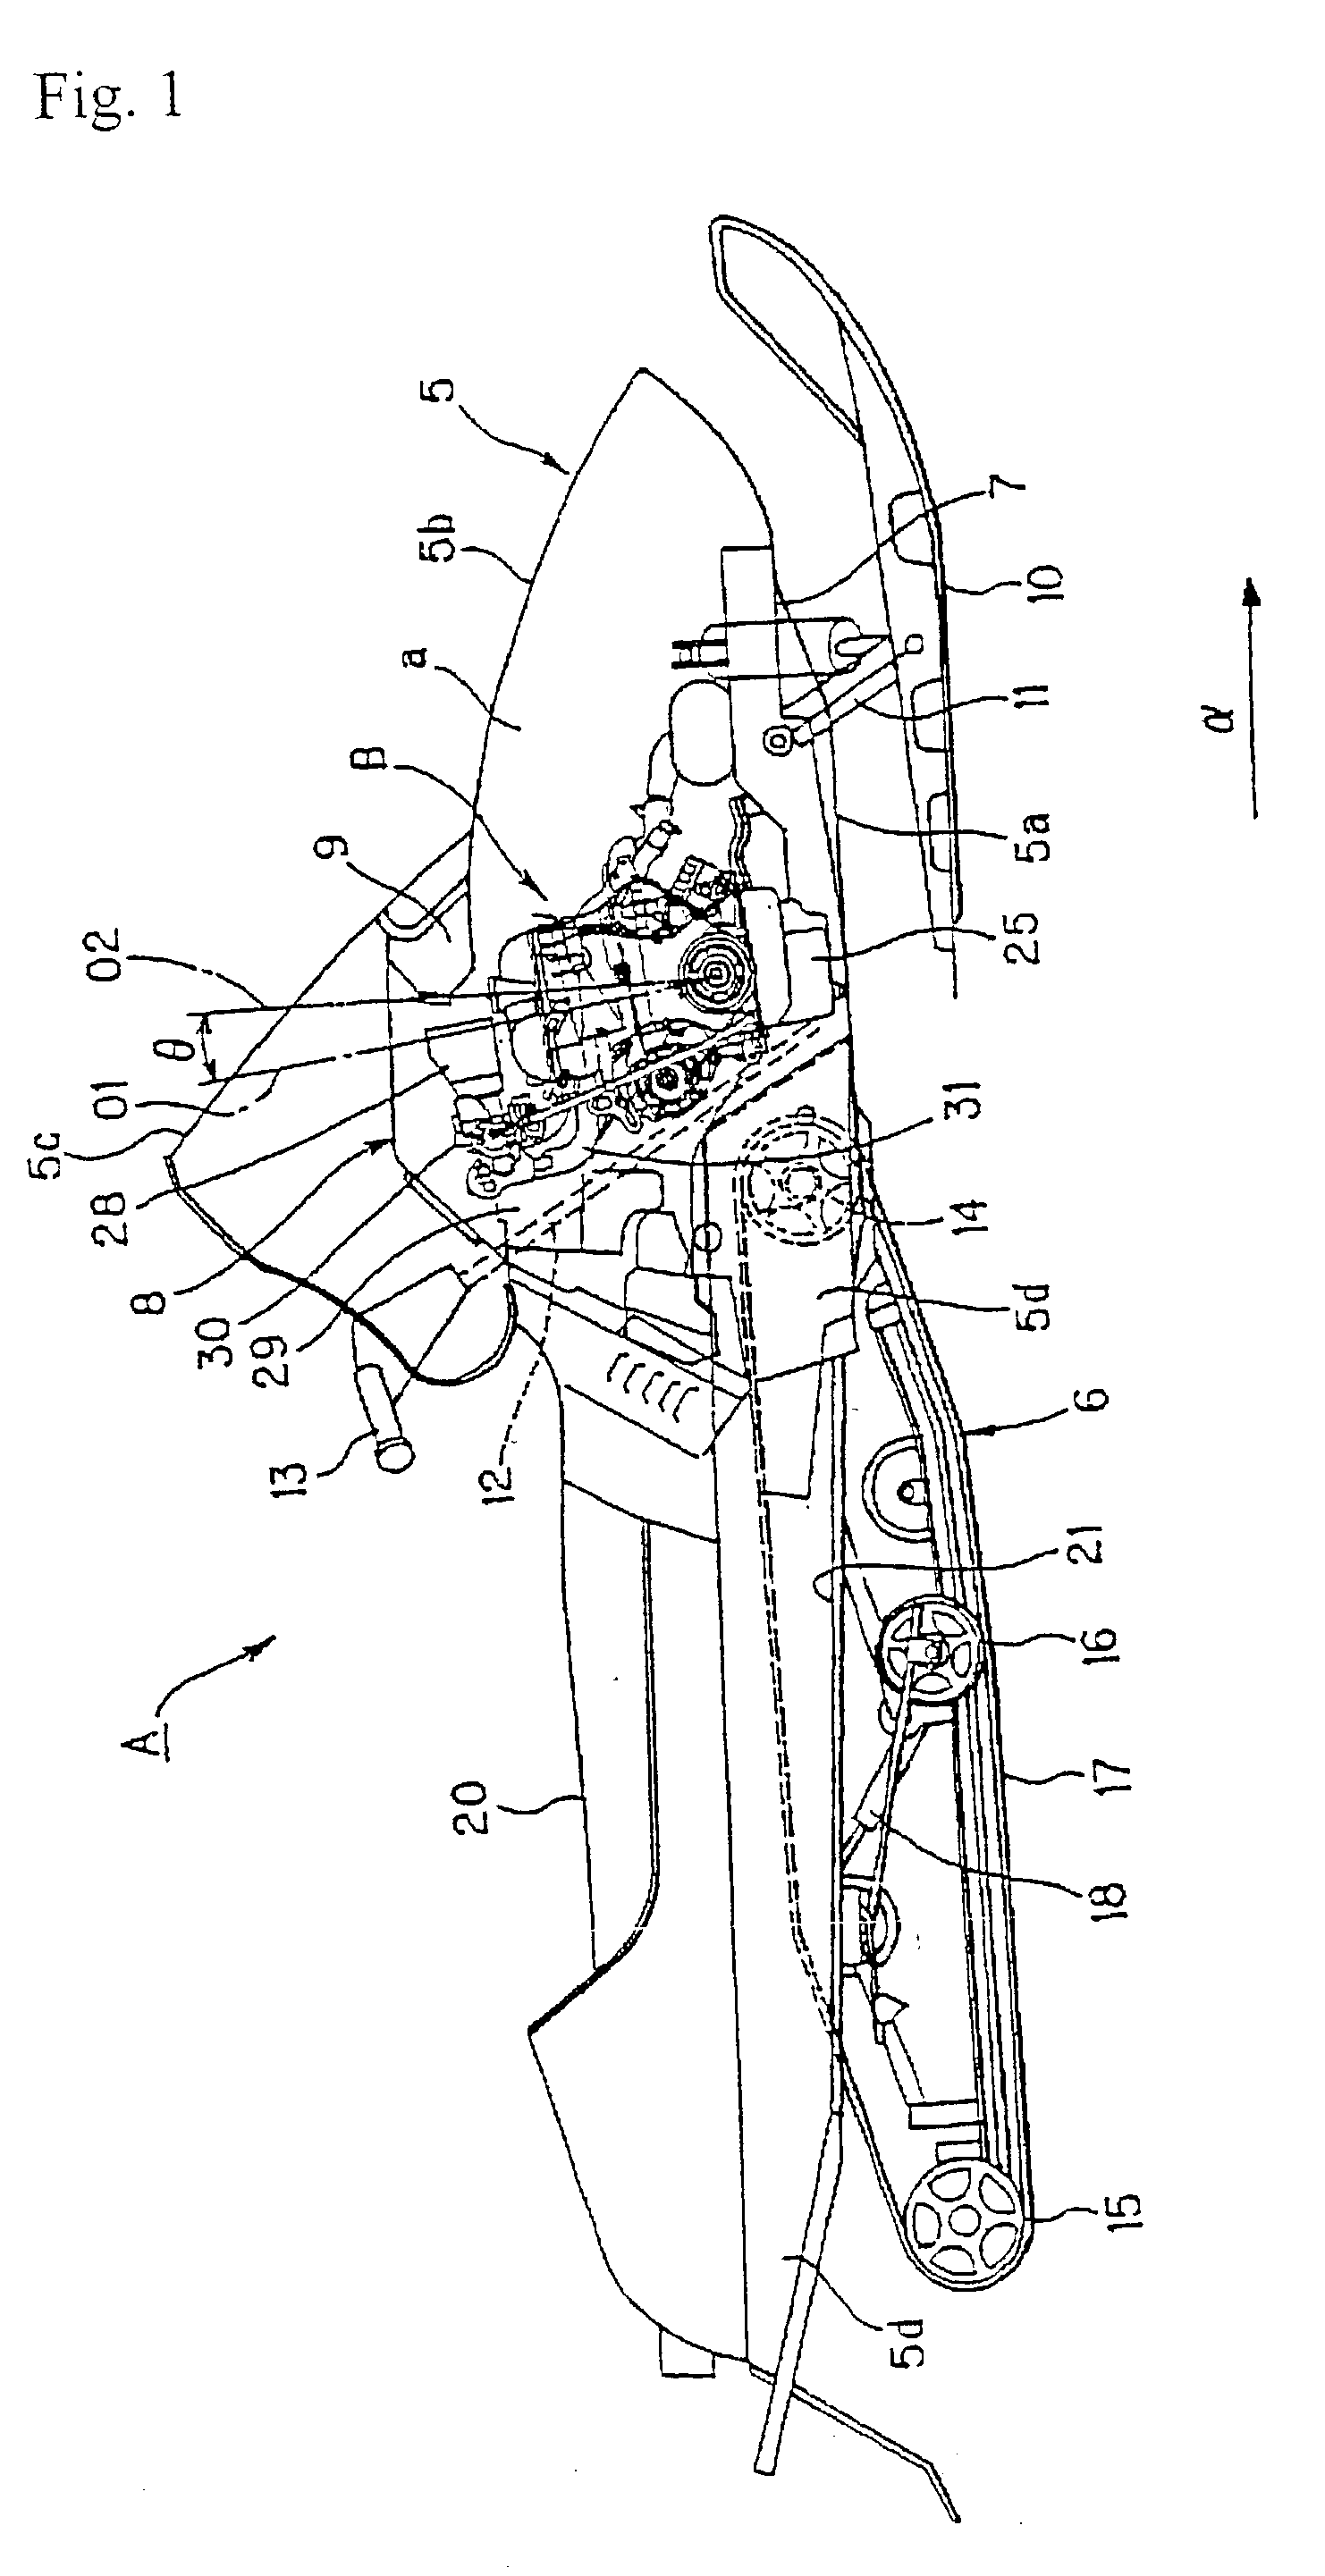 Vehicle-mounted four-cycle engine control device